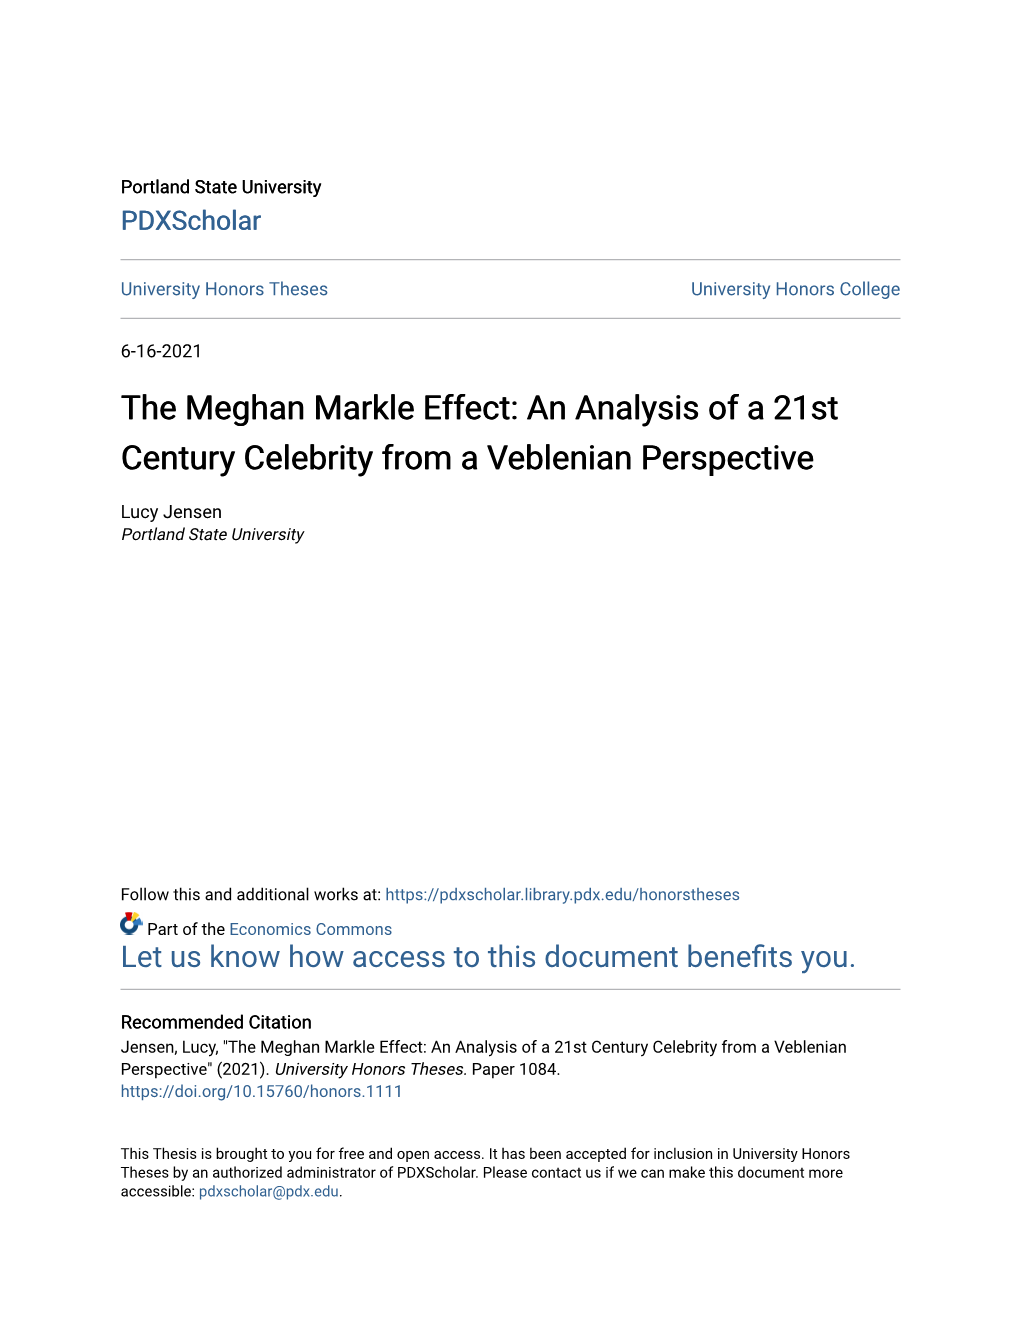 The Meghan Markle Effect: an Analysis of a 21St Century Celebrity from a Veblenian Perspective